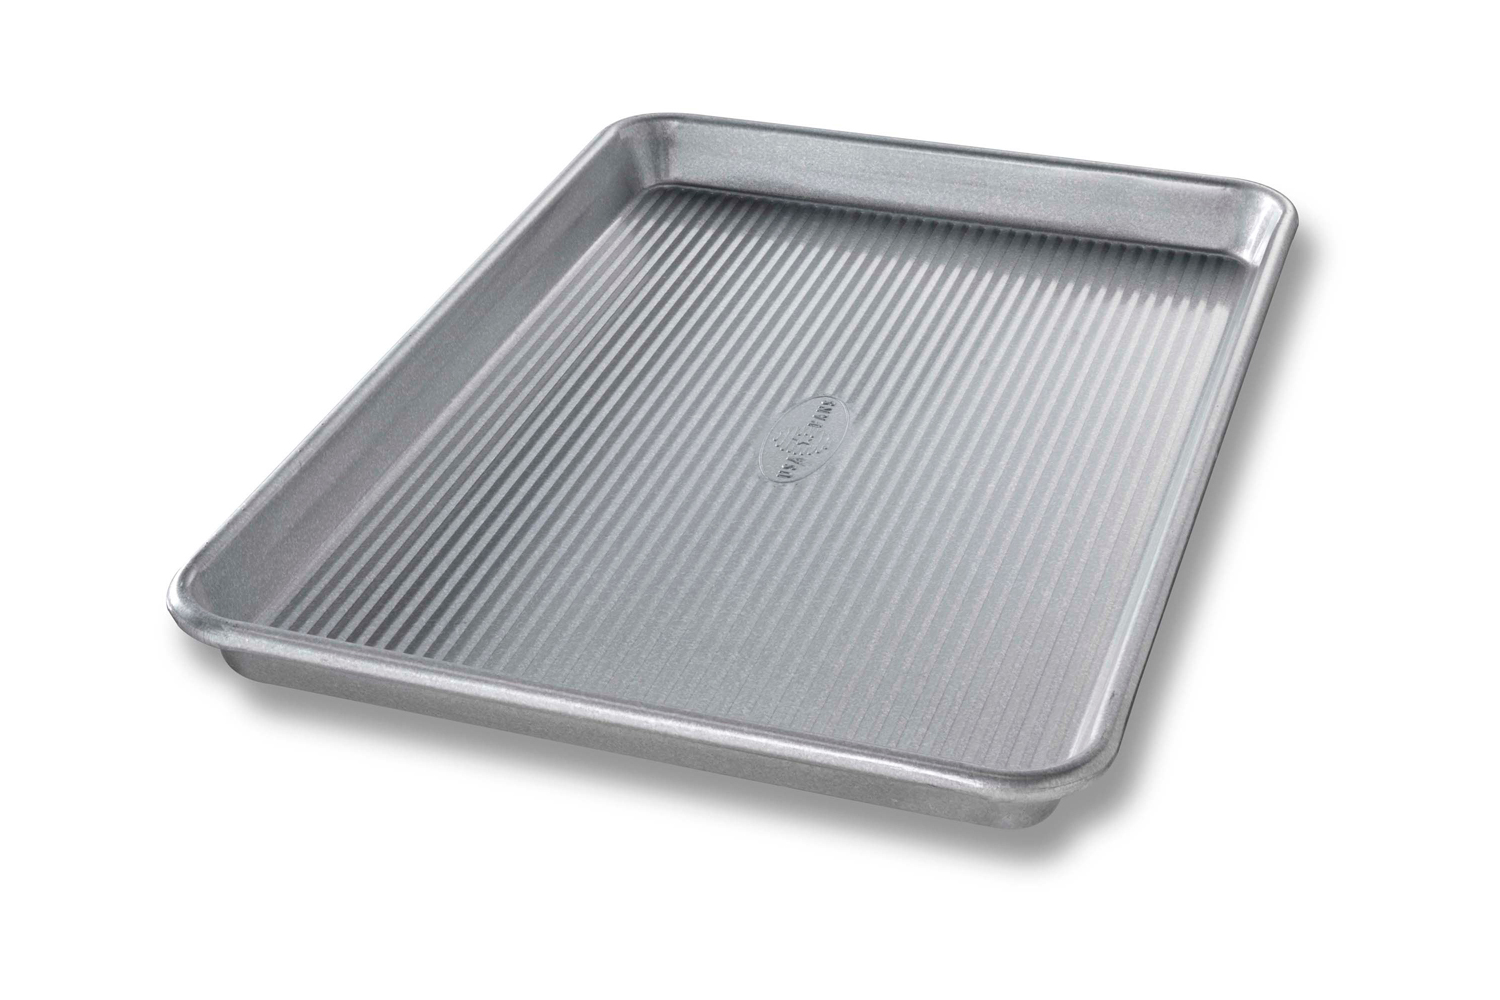 12-Inch x 15-Inch Nonstick Jelly Roll Pan I All-Clad